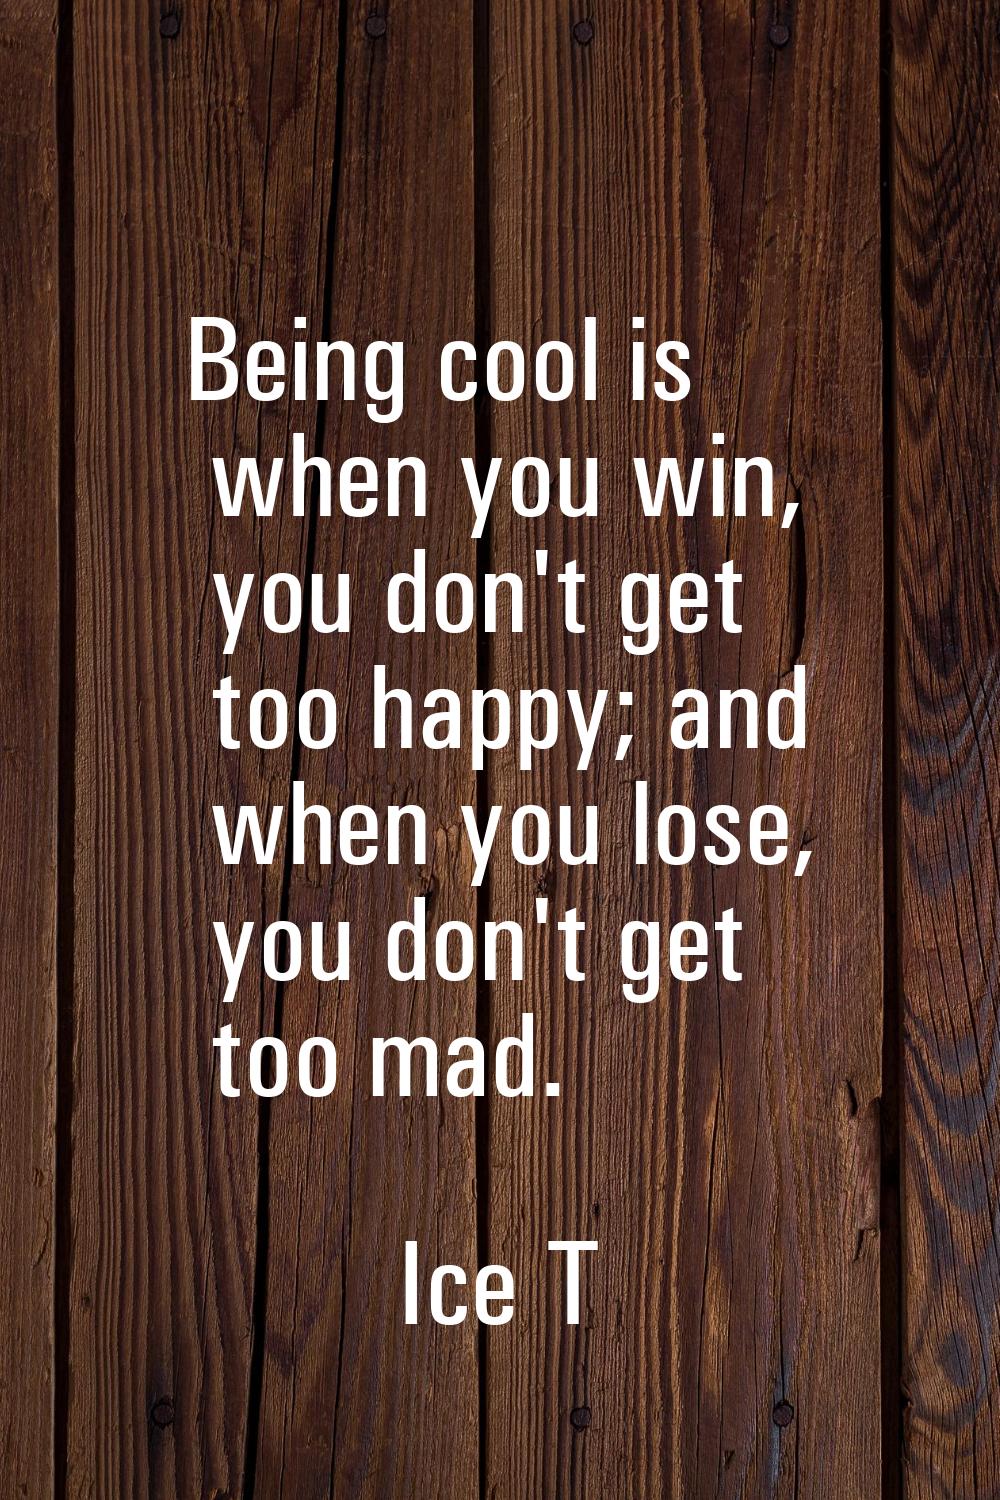 Being cool is when you win, you don't get too happy; and when you lose, you don't get too mad.